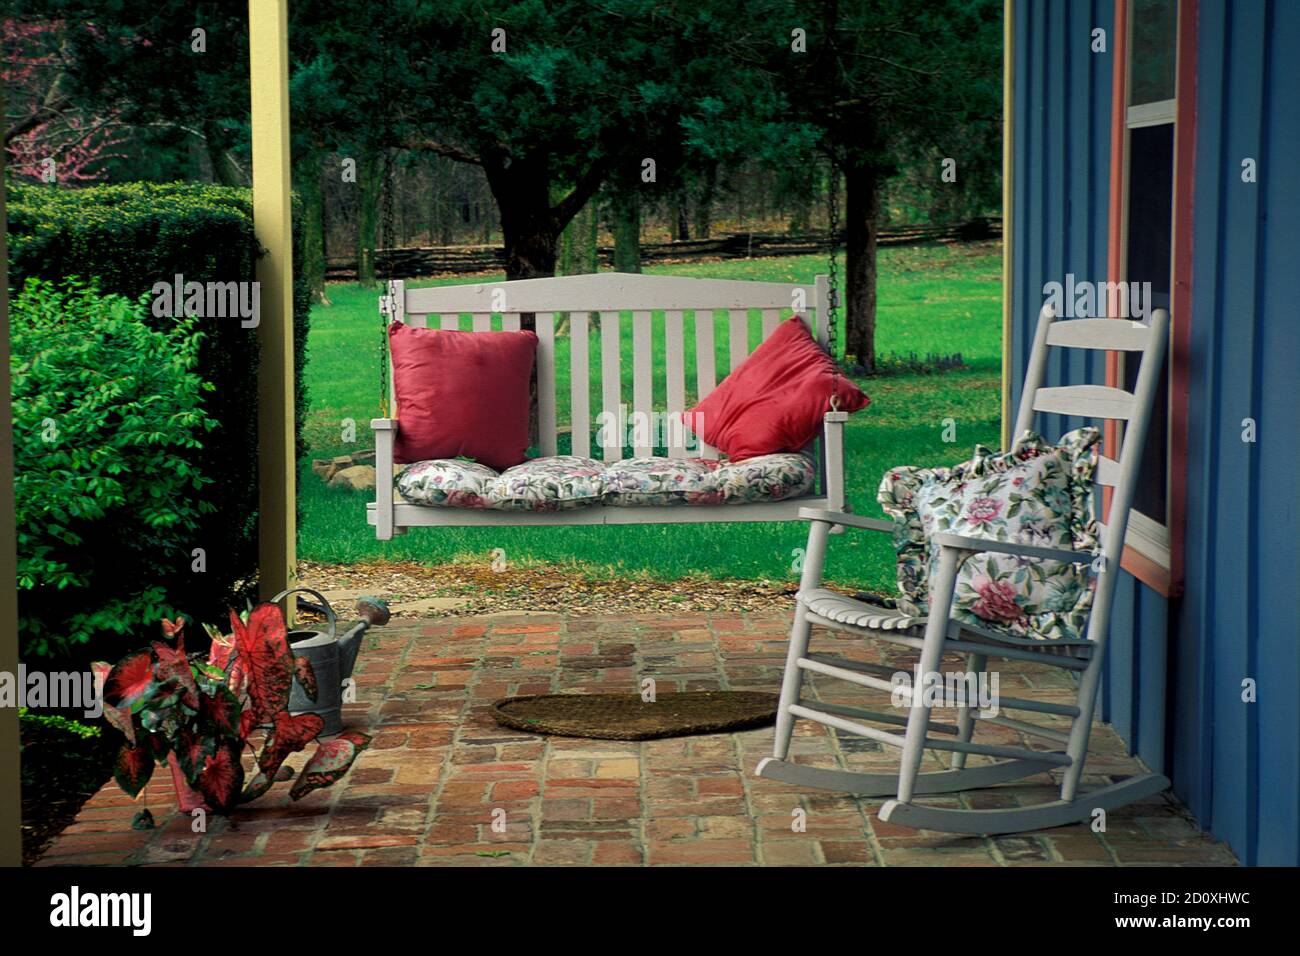 Intimate front porch and entryway into house with swing glider, rocker, and colorful pillows Stock Photo